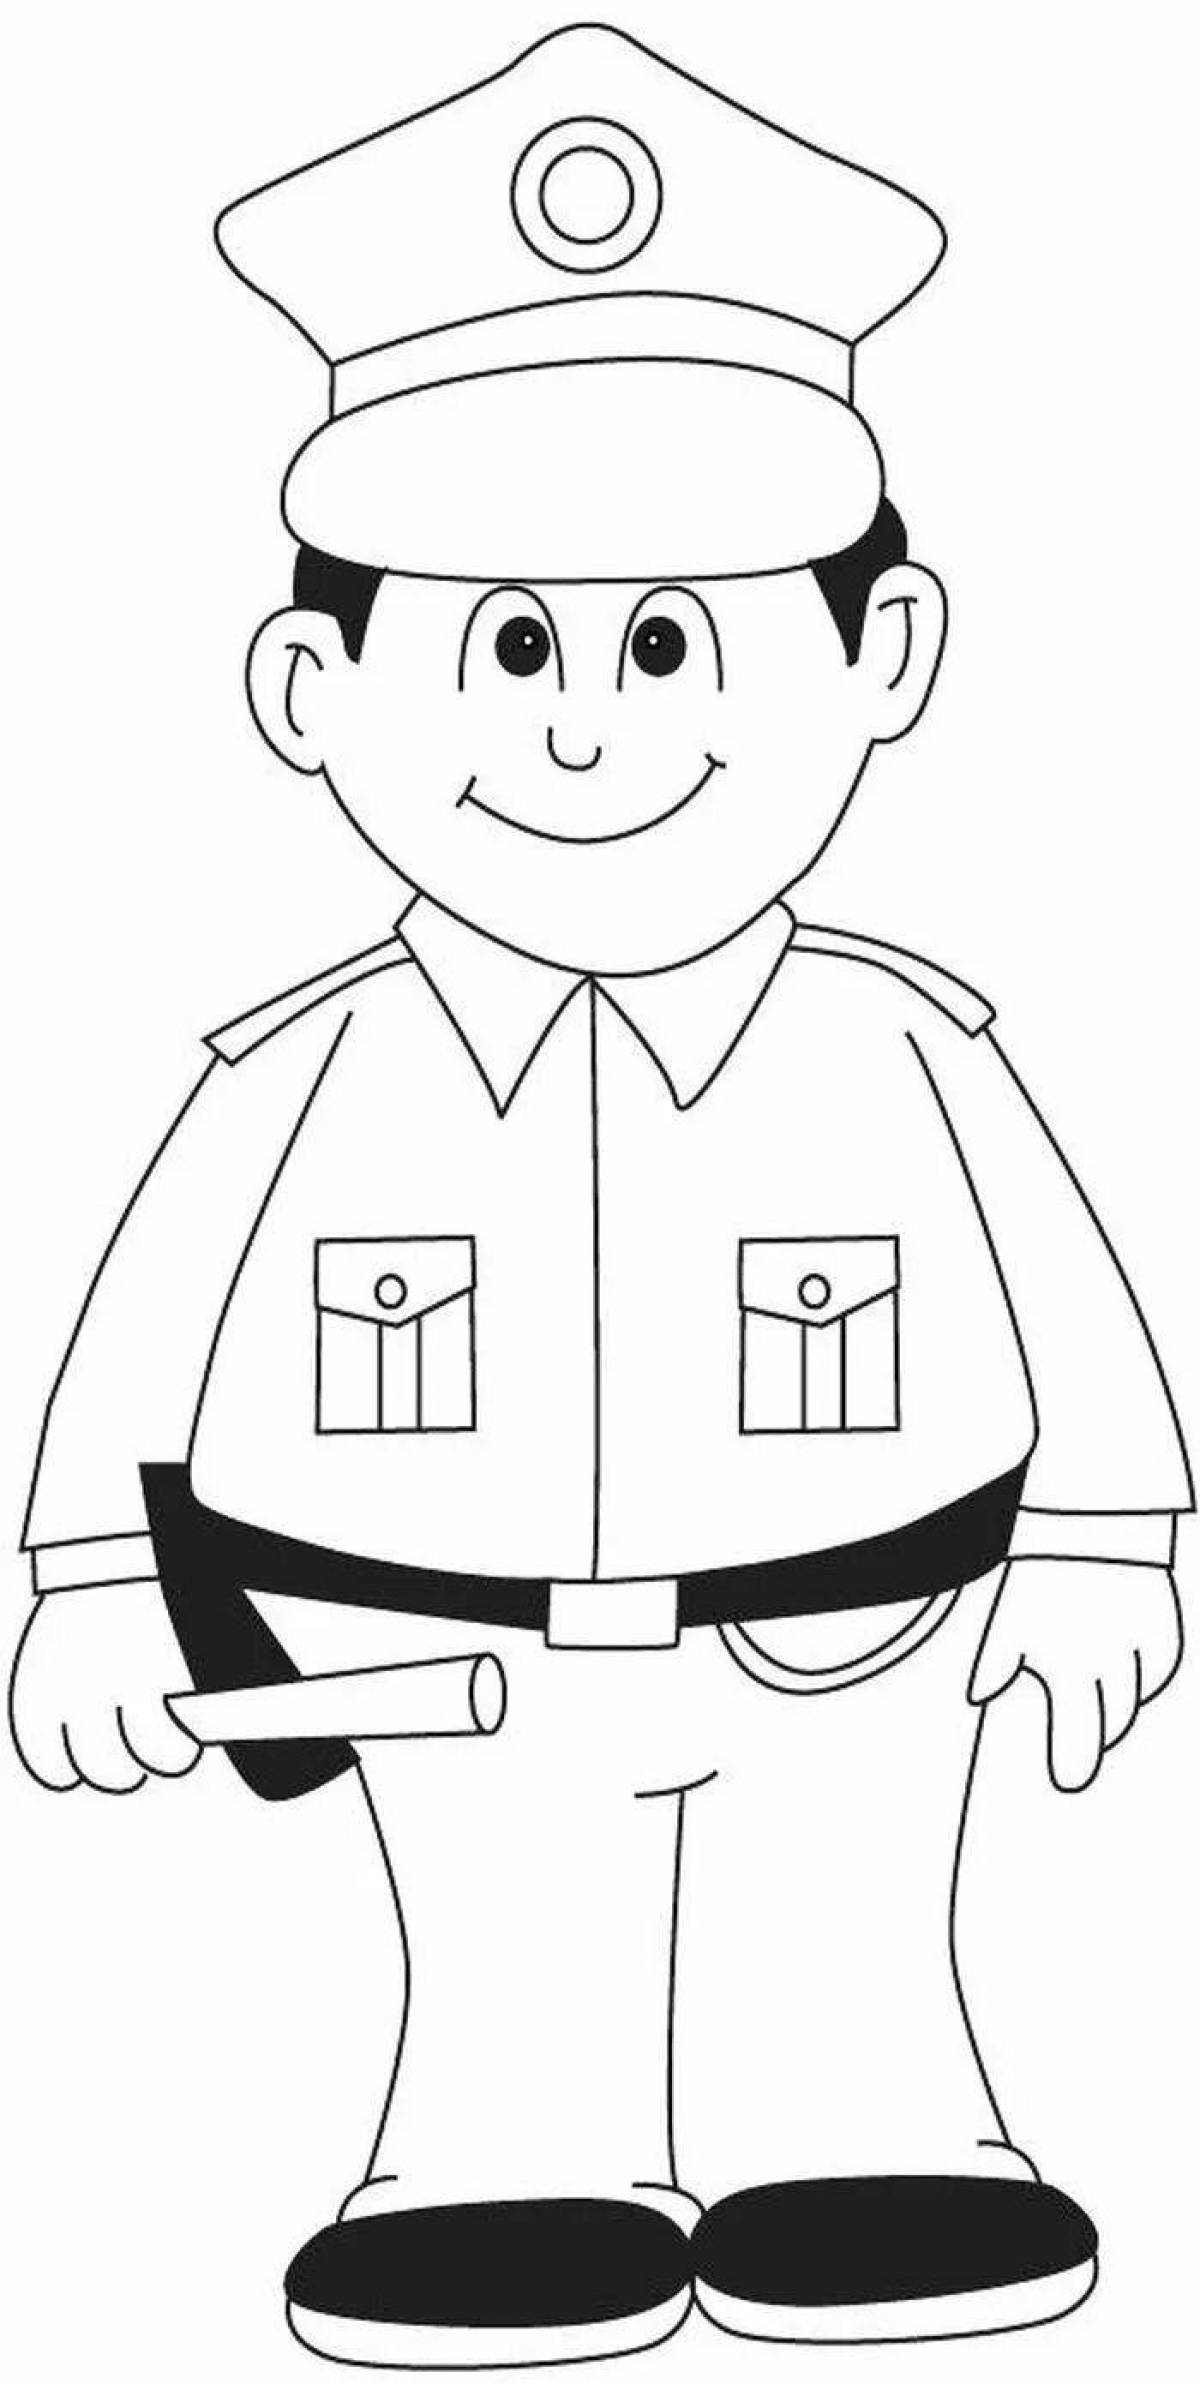 Coloring page traffic police inspector